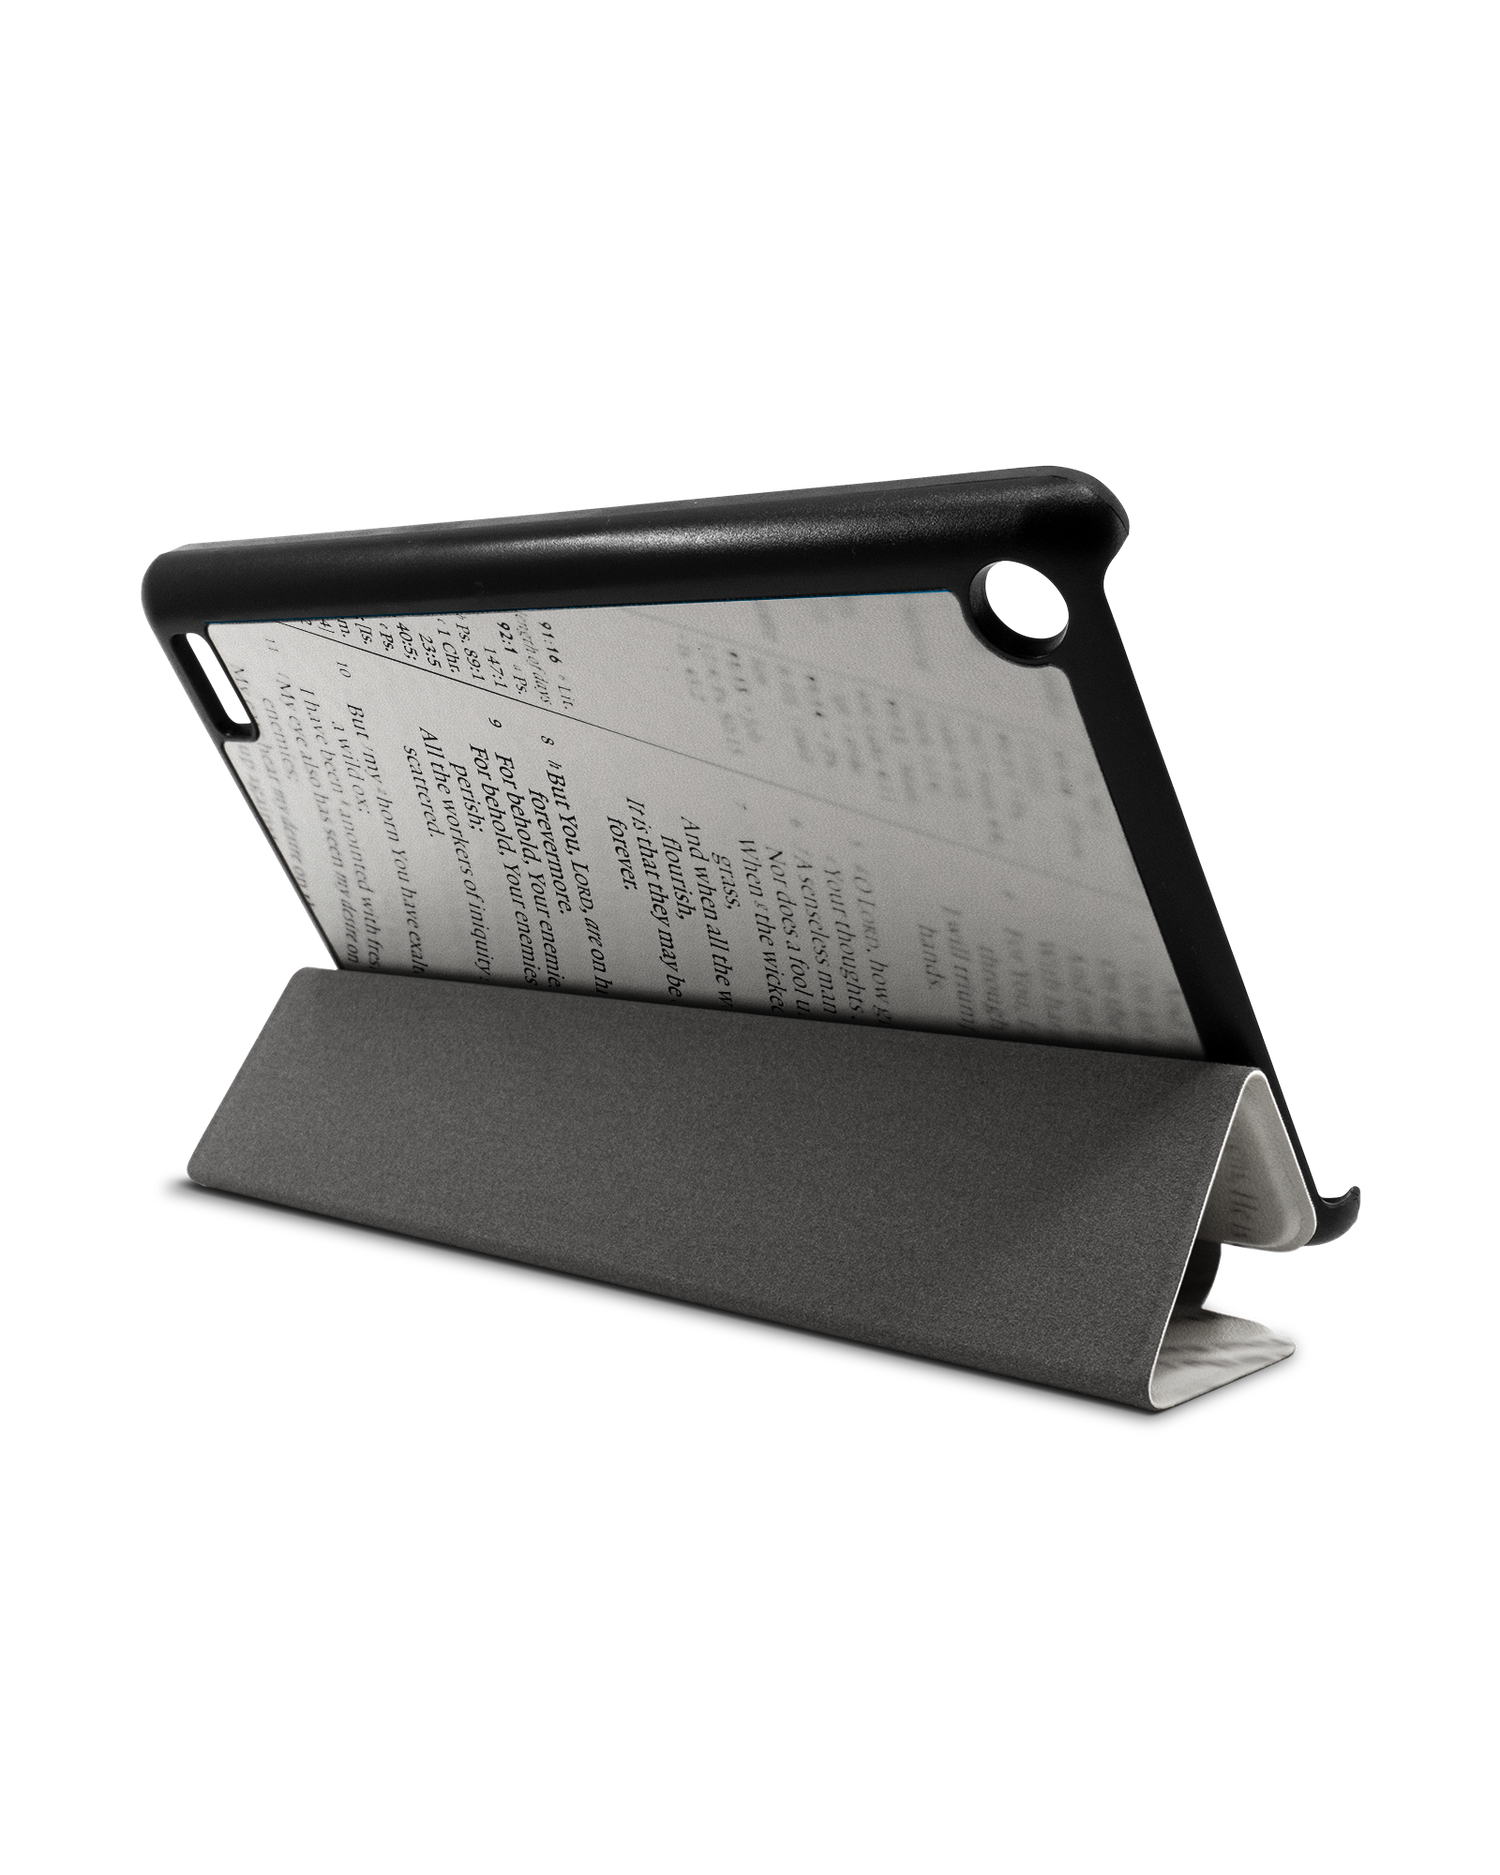 Bible Verse Tablet Smart Case for Amazon Fire 7: Used as Stand